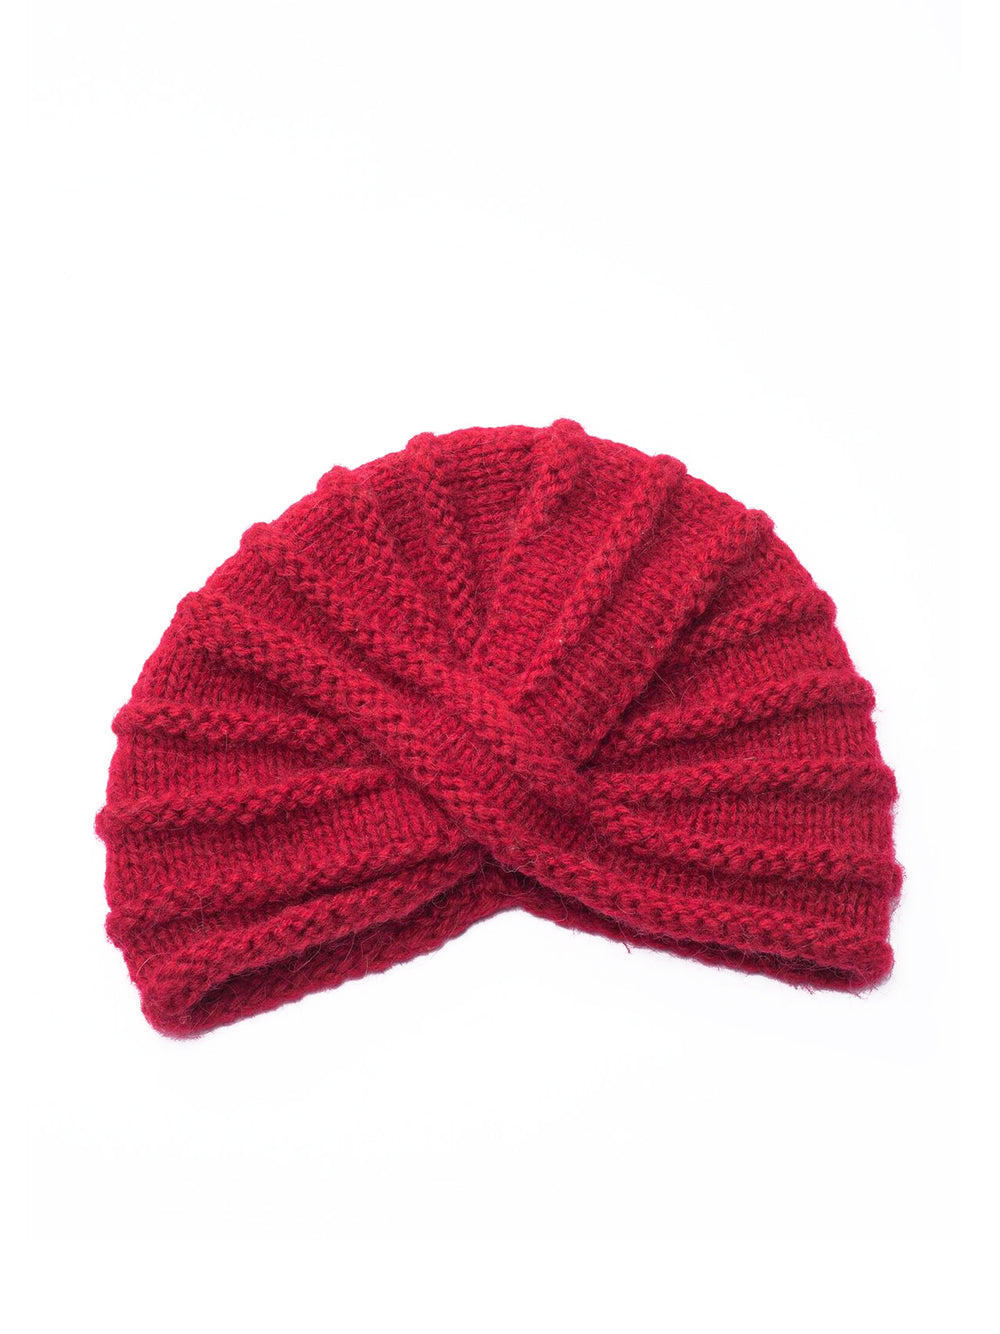 Knitted wool turban - red